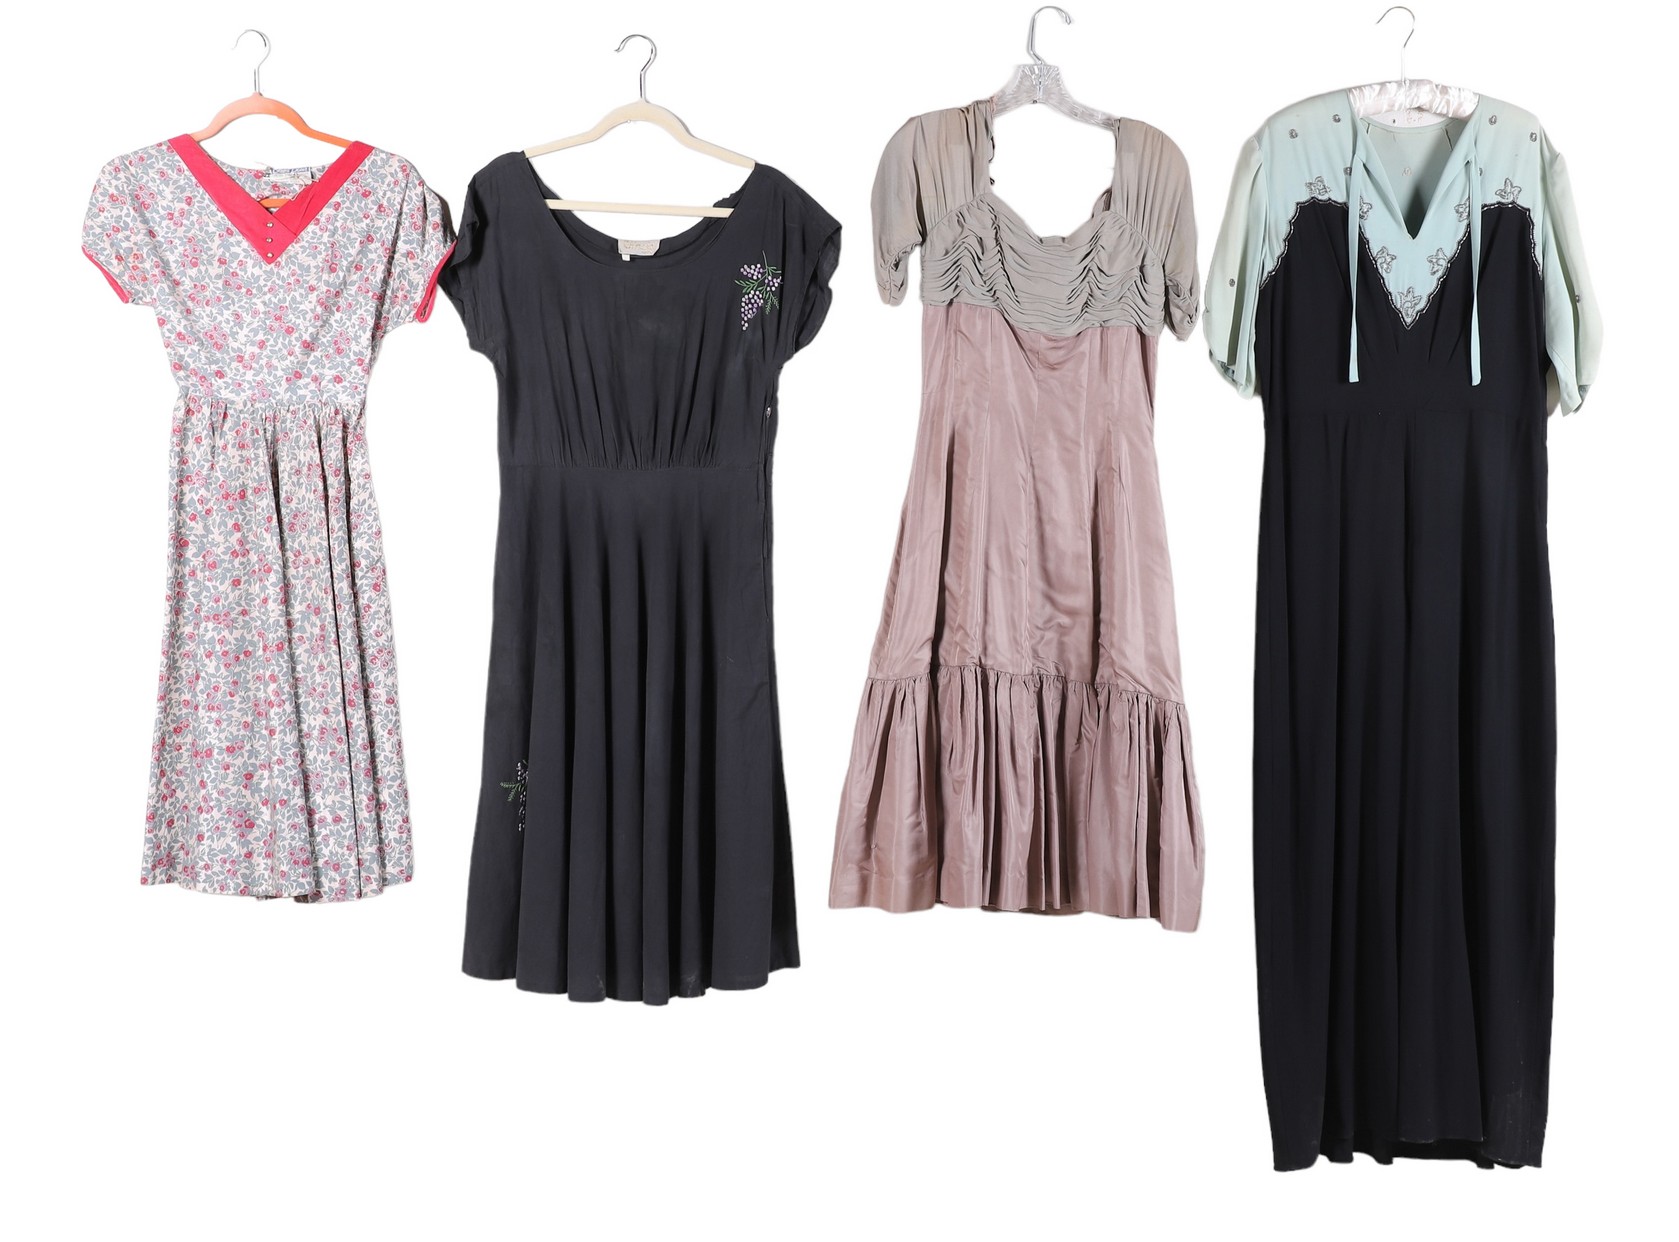  4 1940 s dresses to include Bonnie 317d9b